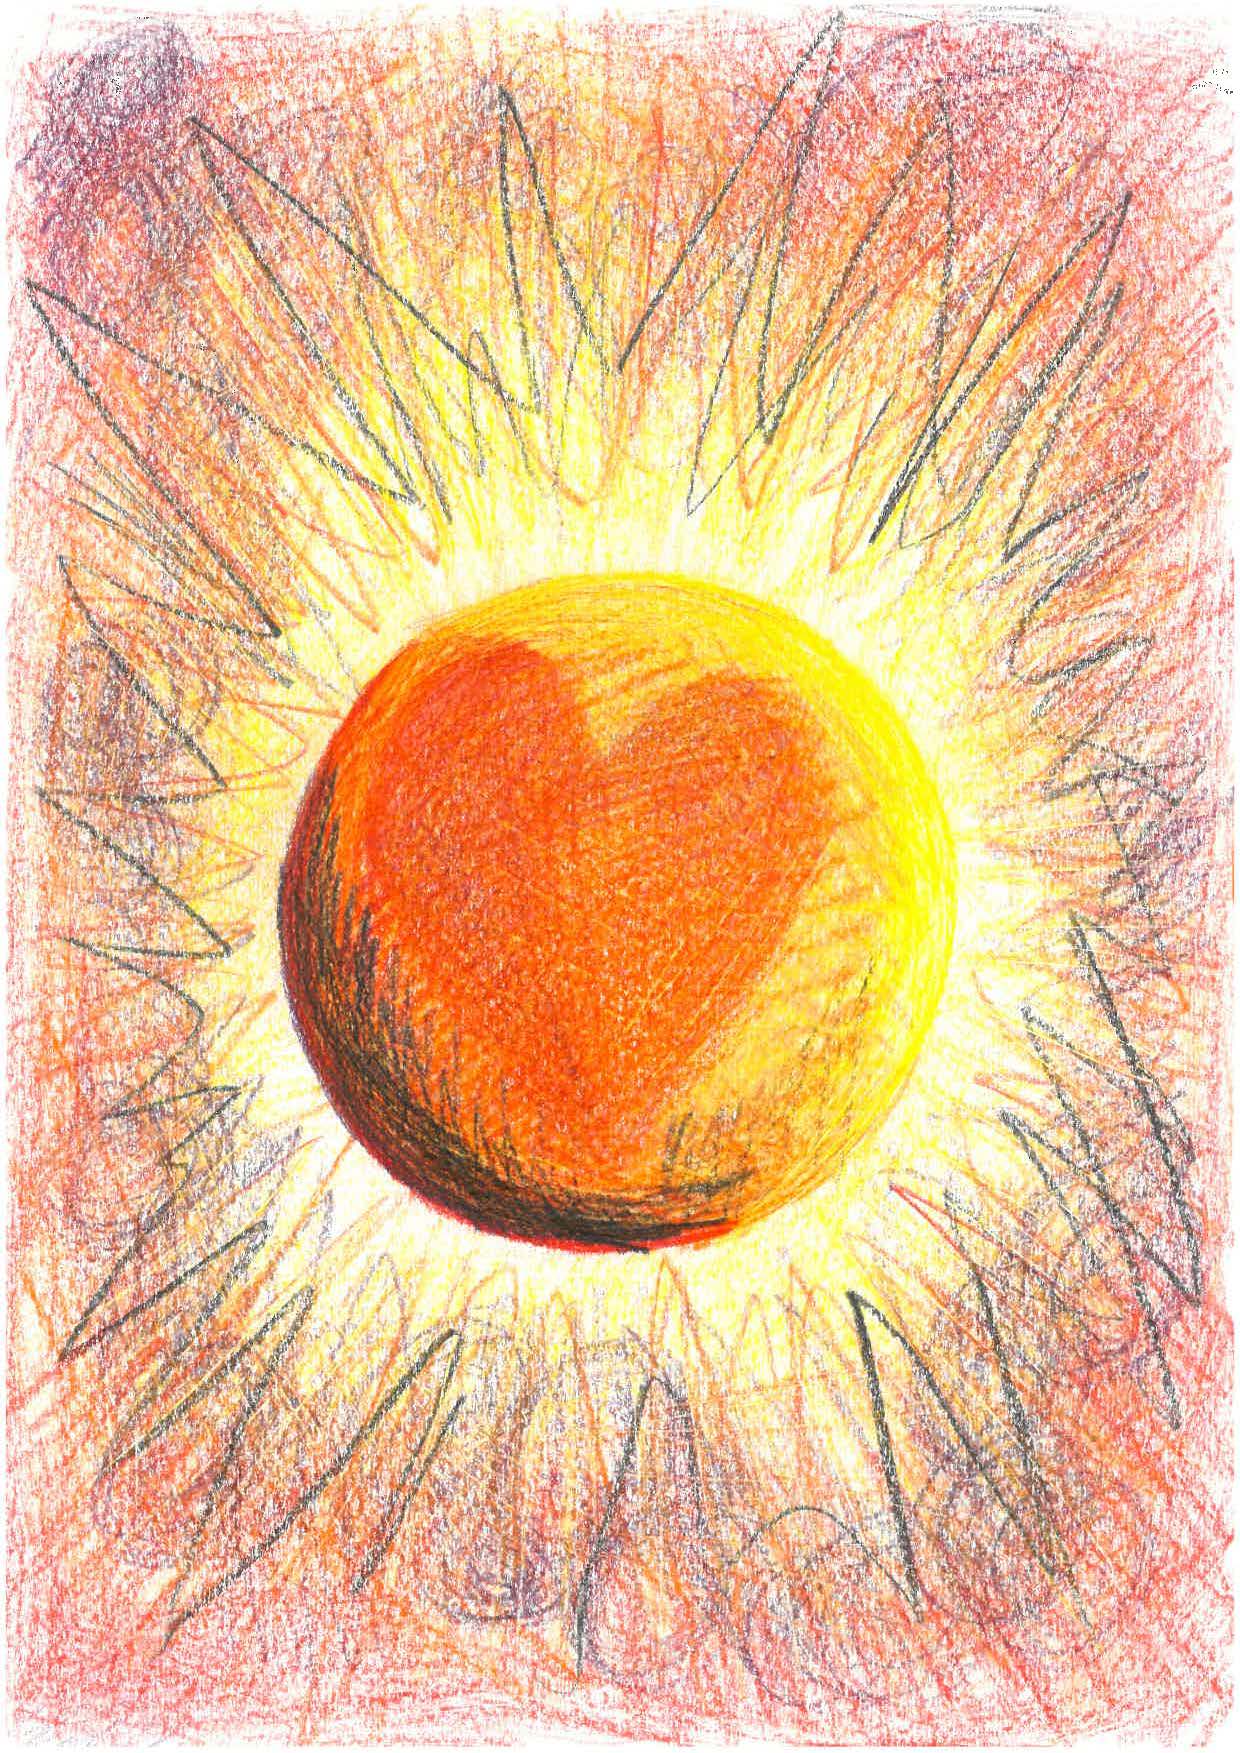 Drawing of a heart on a bright sun in warm colors.